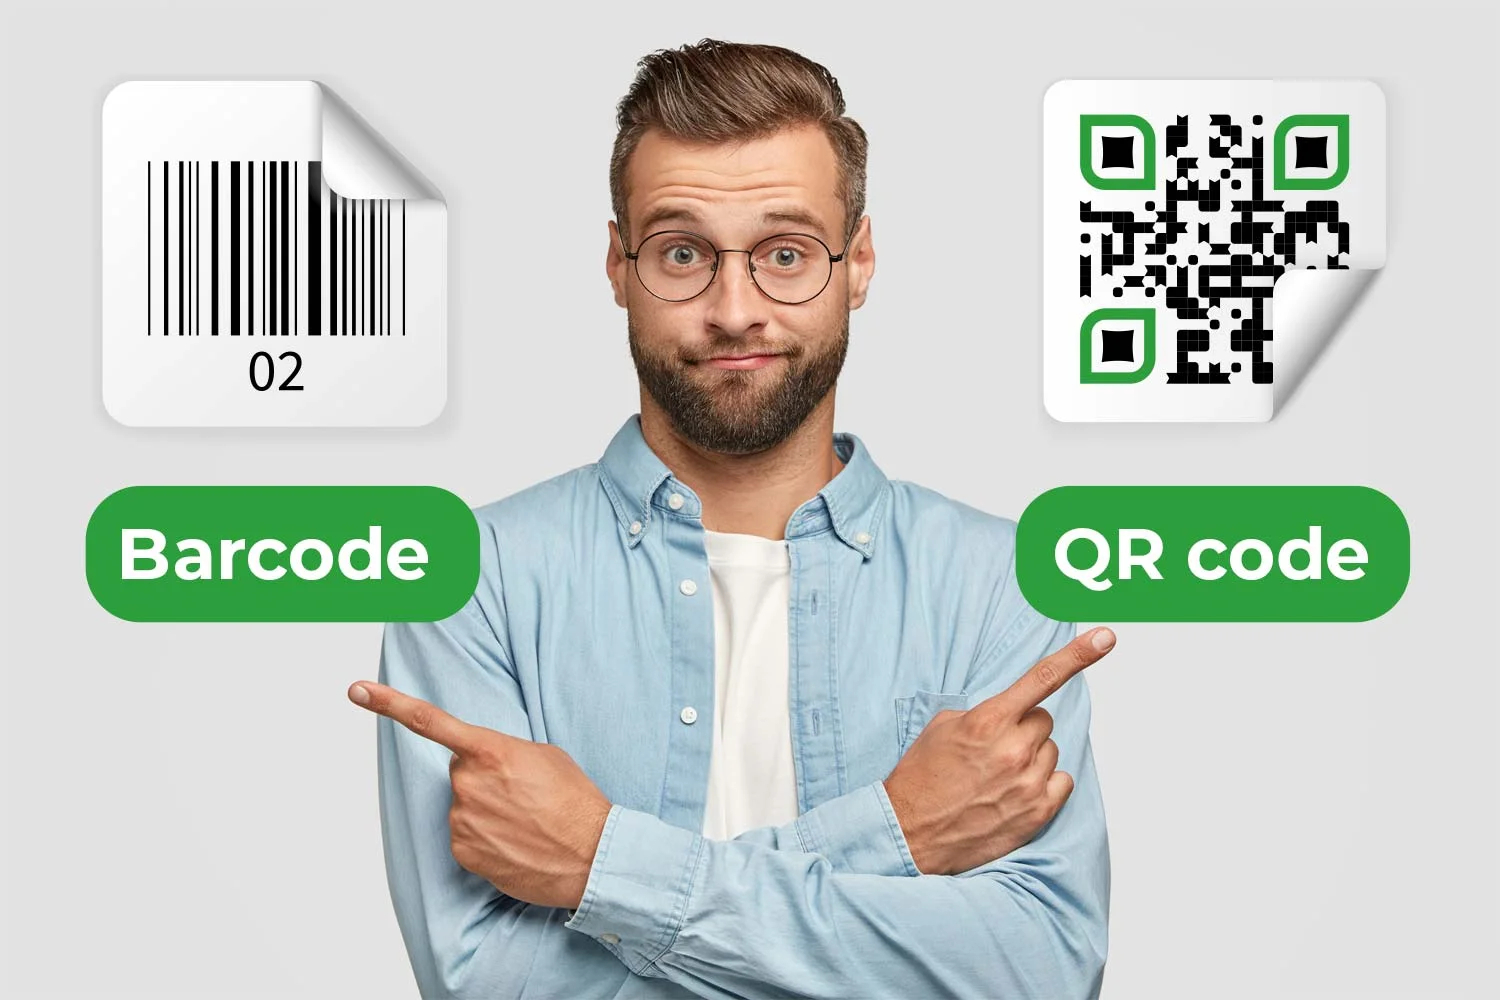 Man thinking which one to choose: Barcode or QR code